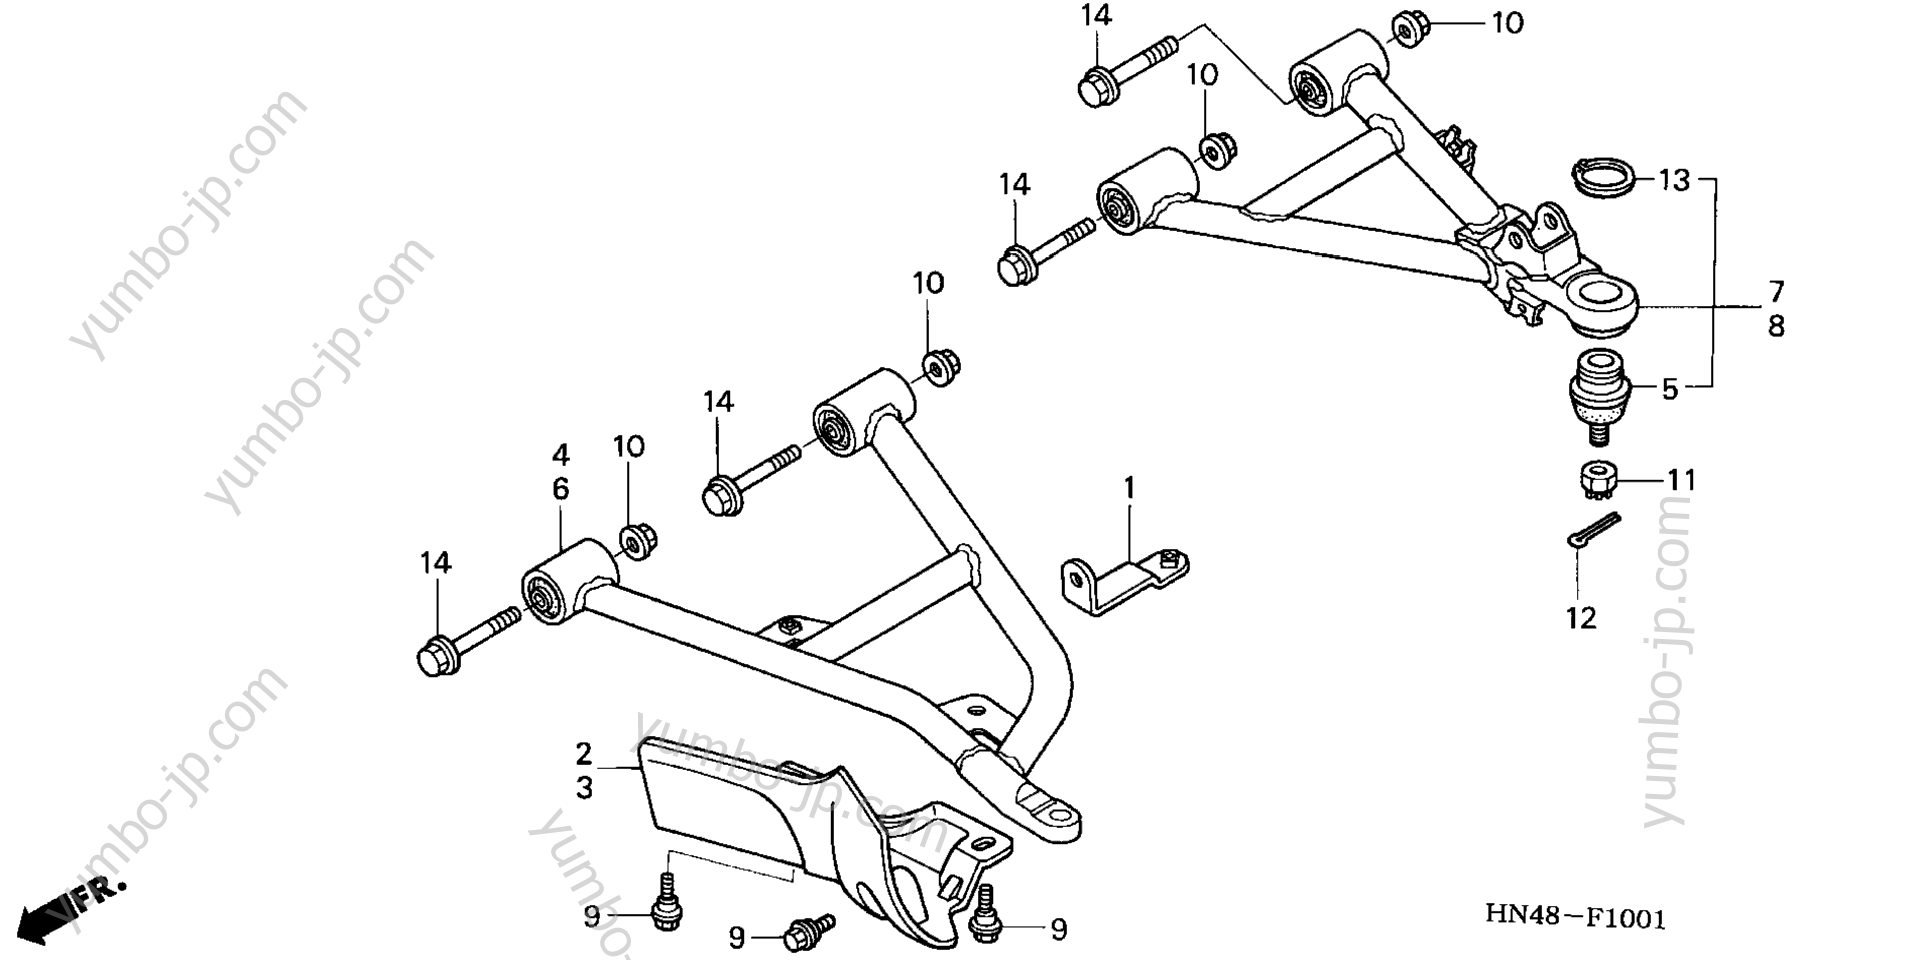 FRONT ARM (4WD) for ATVs HONDA TRX350FE A 2005 year